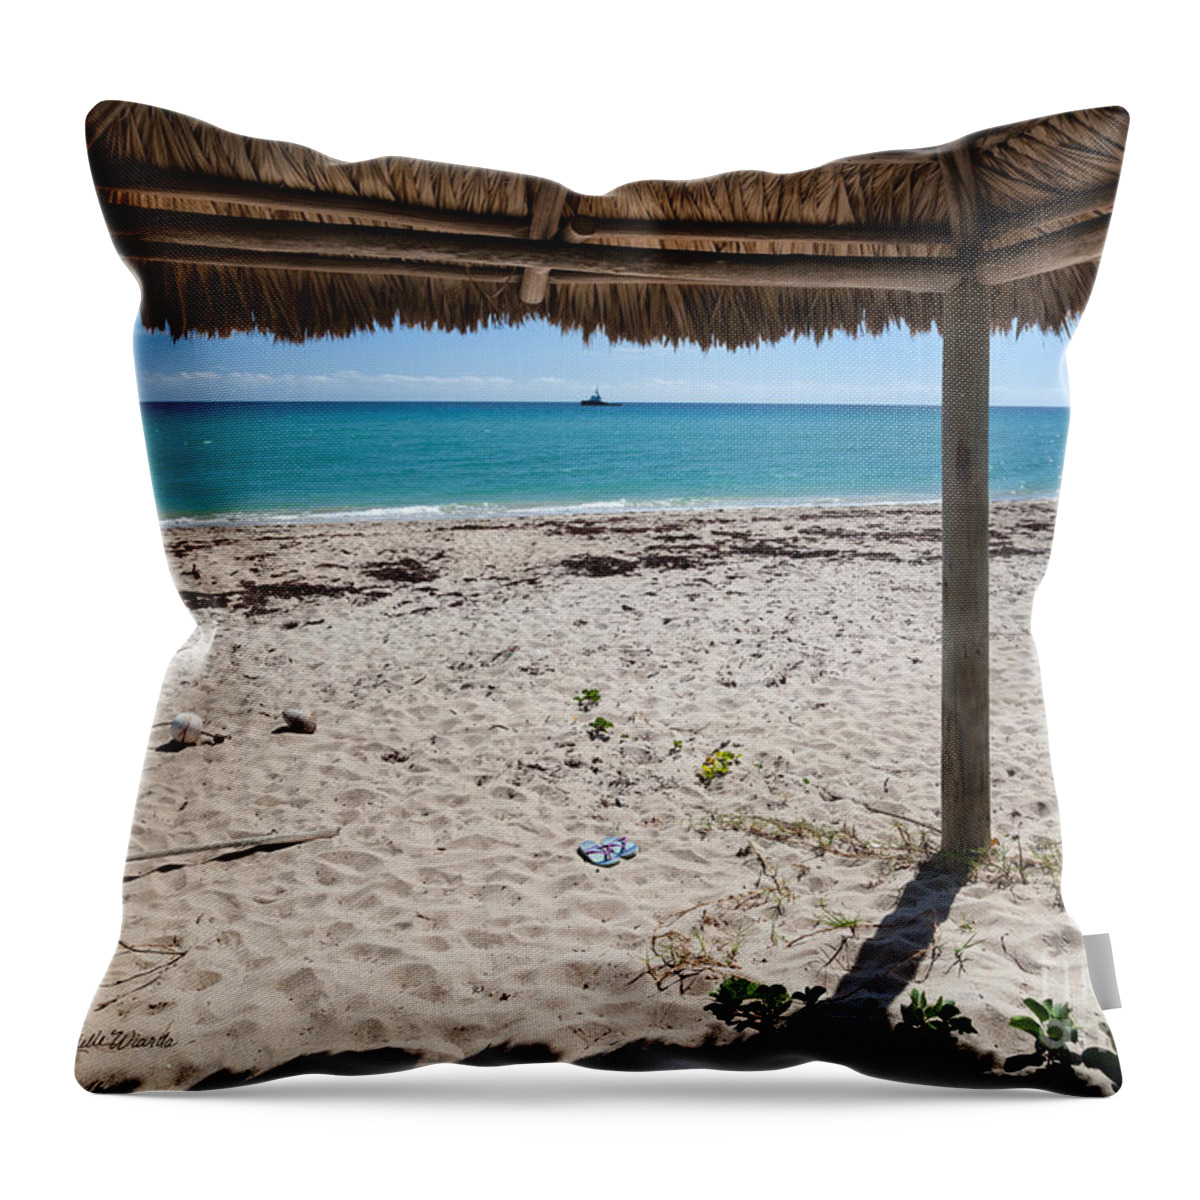 A Seat In A Tropical Beach Hut Throw Pillow featuring the photograph A Seat in a Tropical Beach Hut by Michelle Constantine